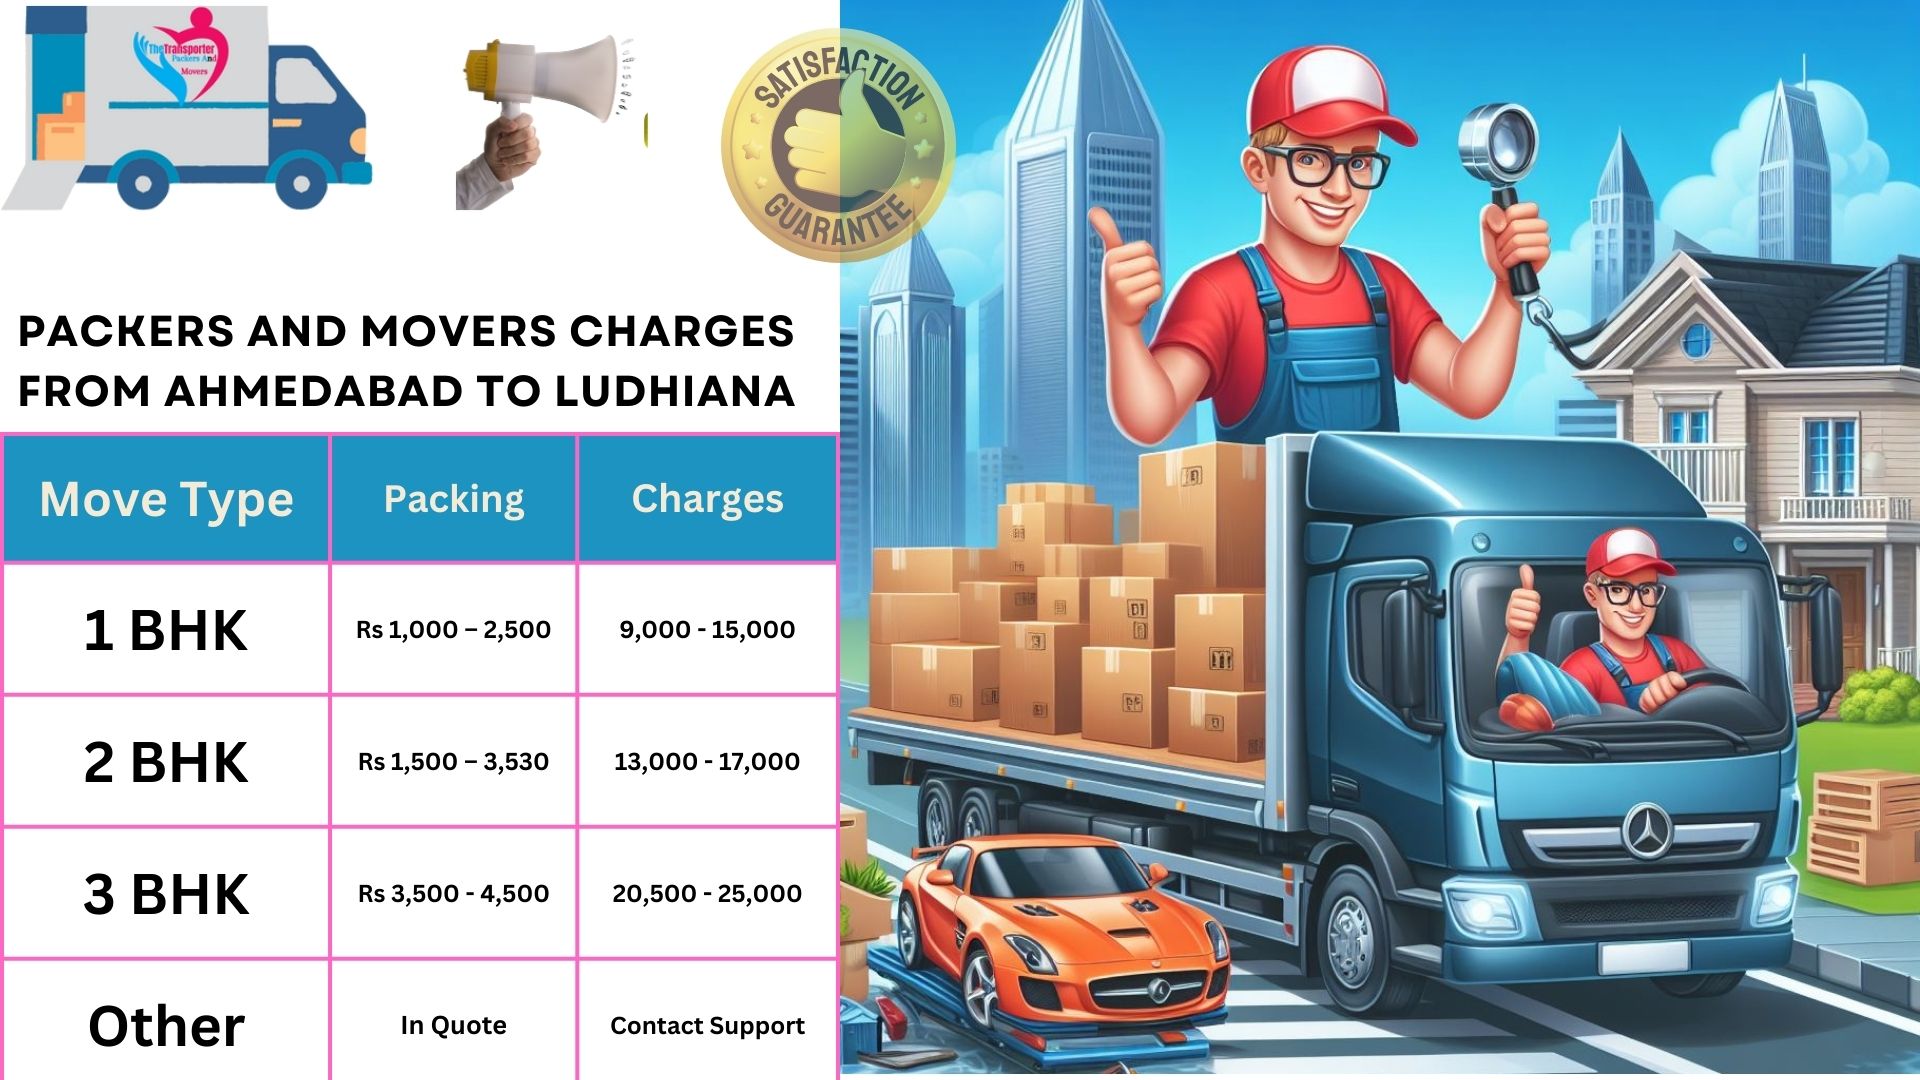 Your household goods shifting from Ahmedabad to Ludhiana